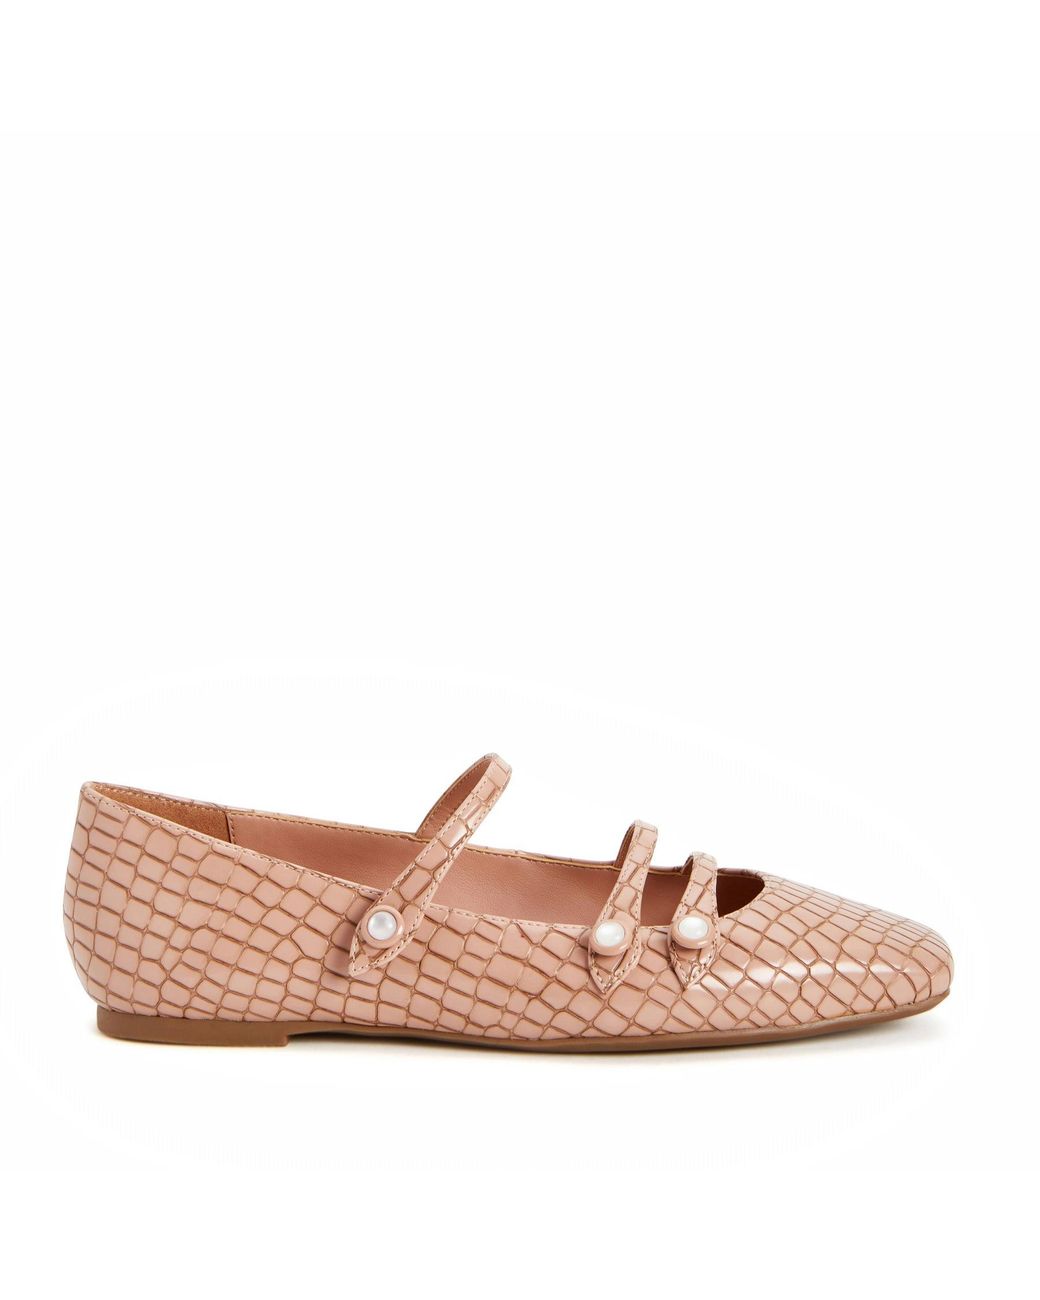 Katy Perry The Evie Button Flat in Natural | Lyst